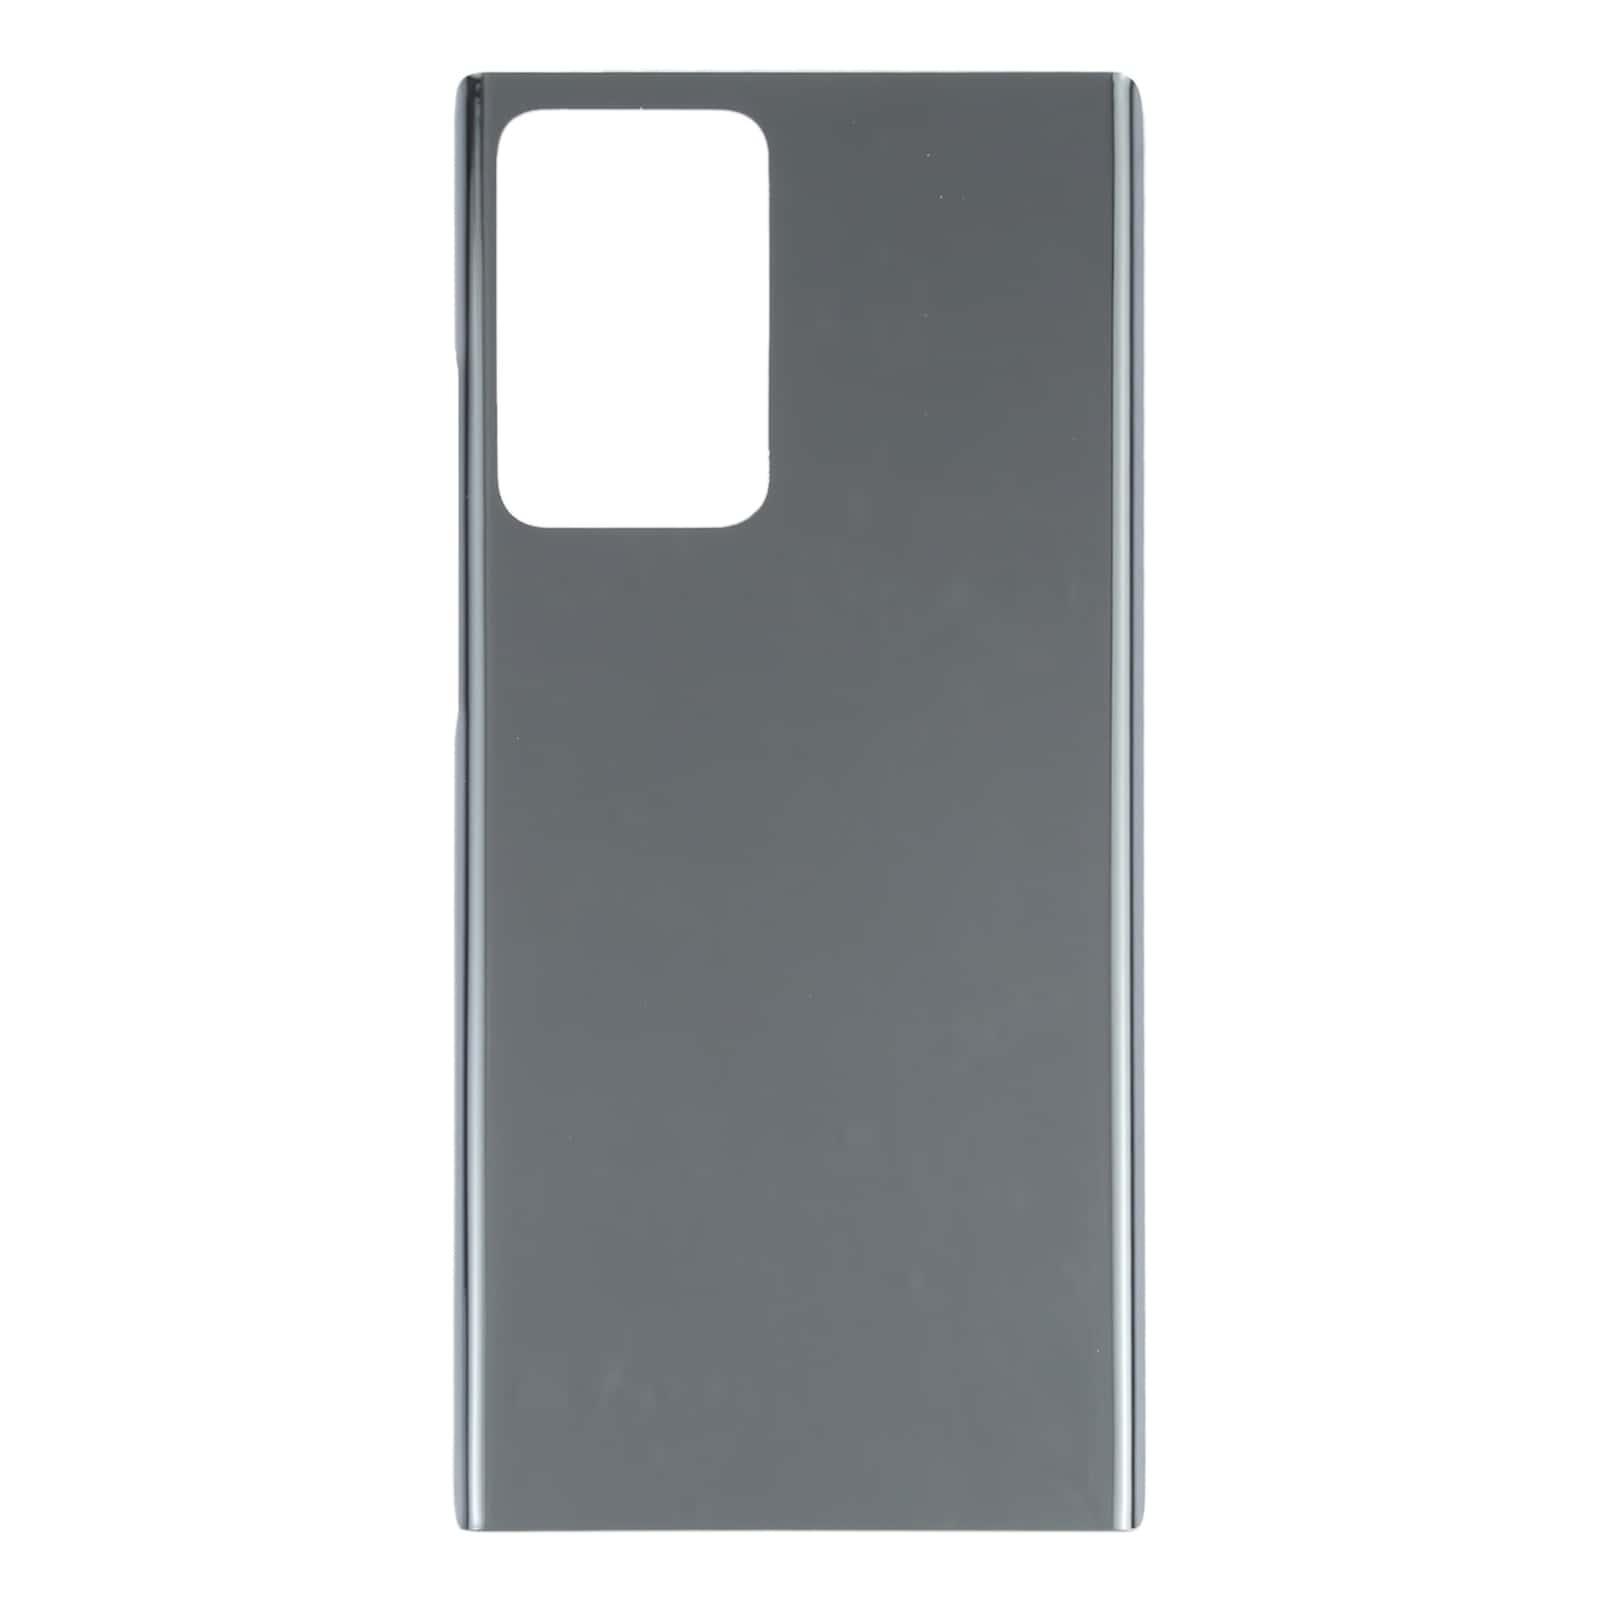 Back Glass Panel for  Samsung Galaxy Note20 Ultra 5G Black